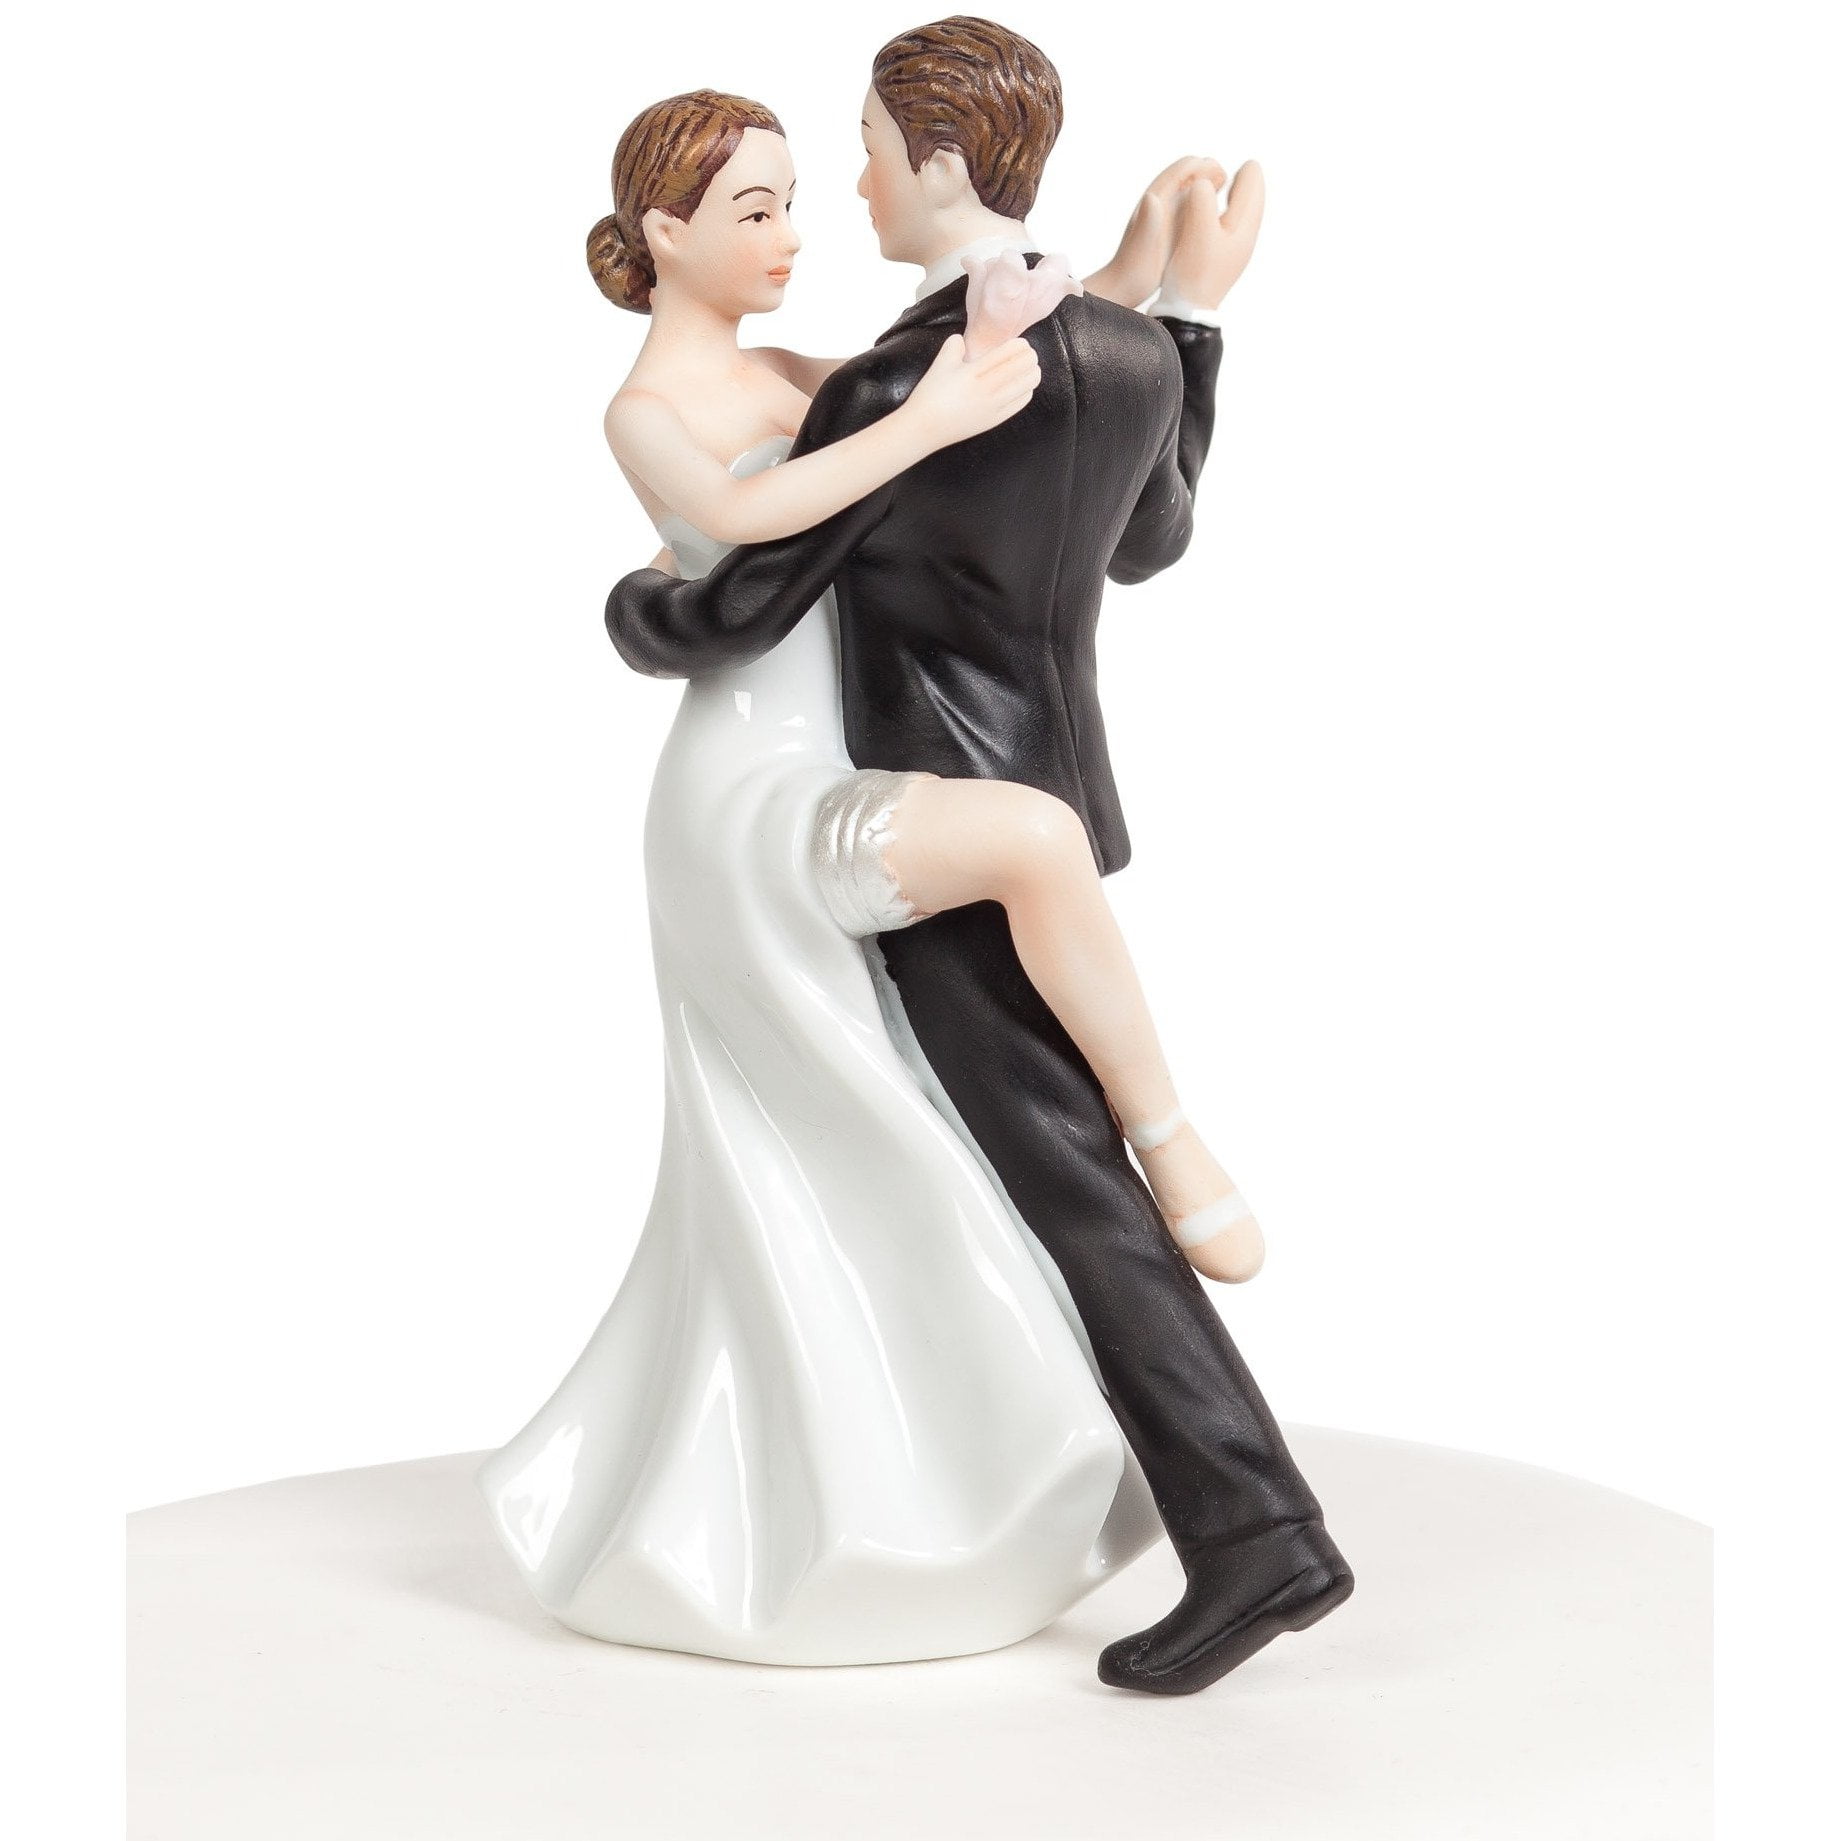 WEDDING CAKE TOPPER Dancing Bride and Groom cute novelty figurine decoration 